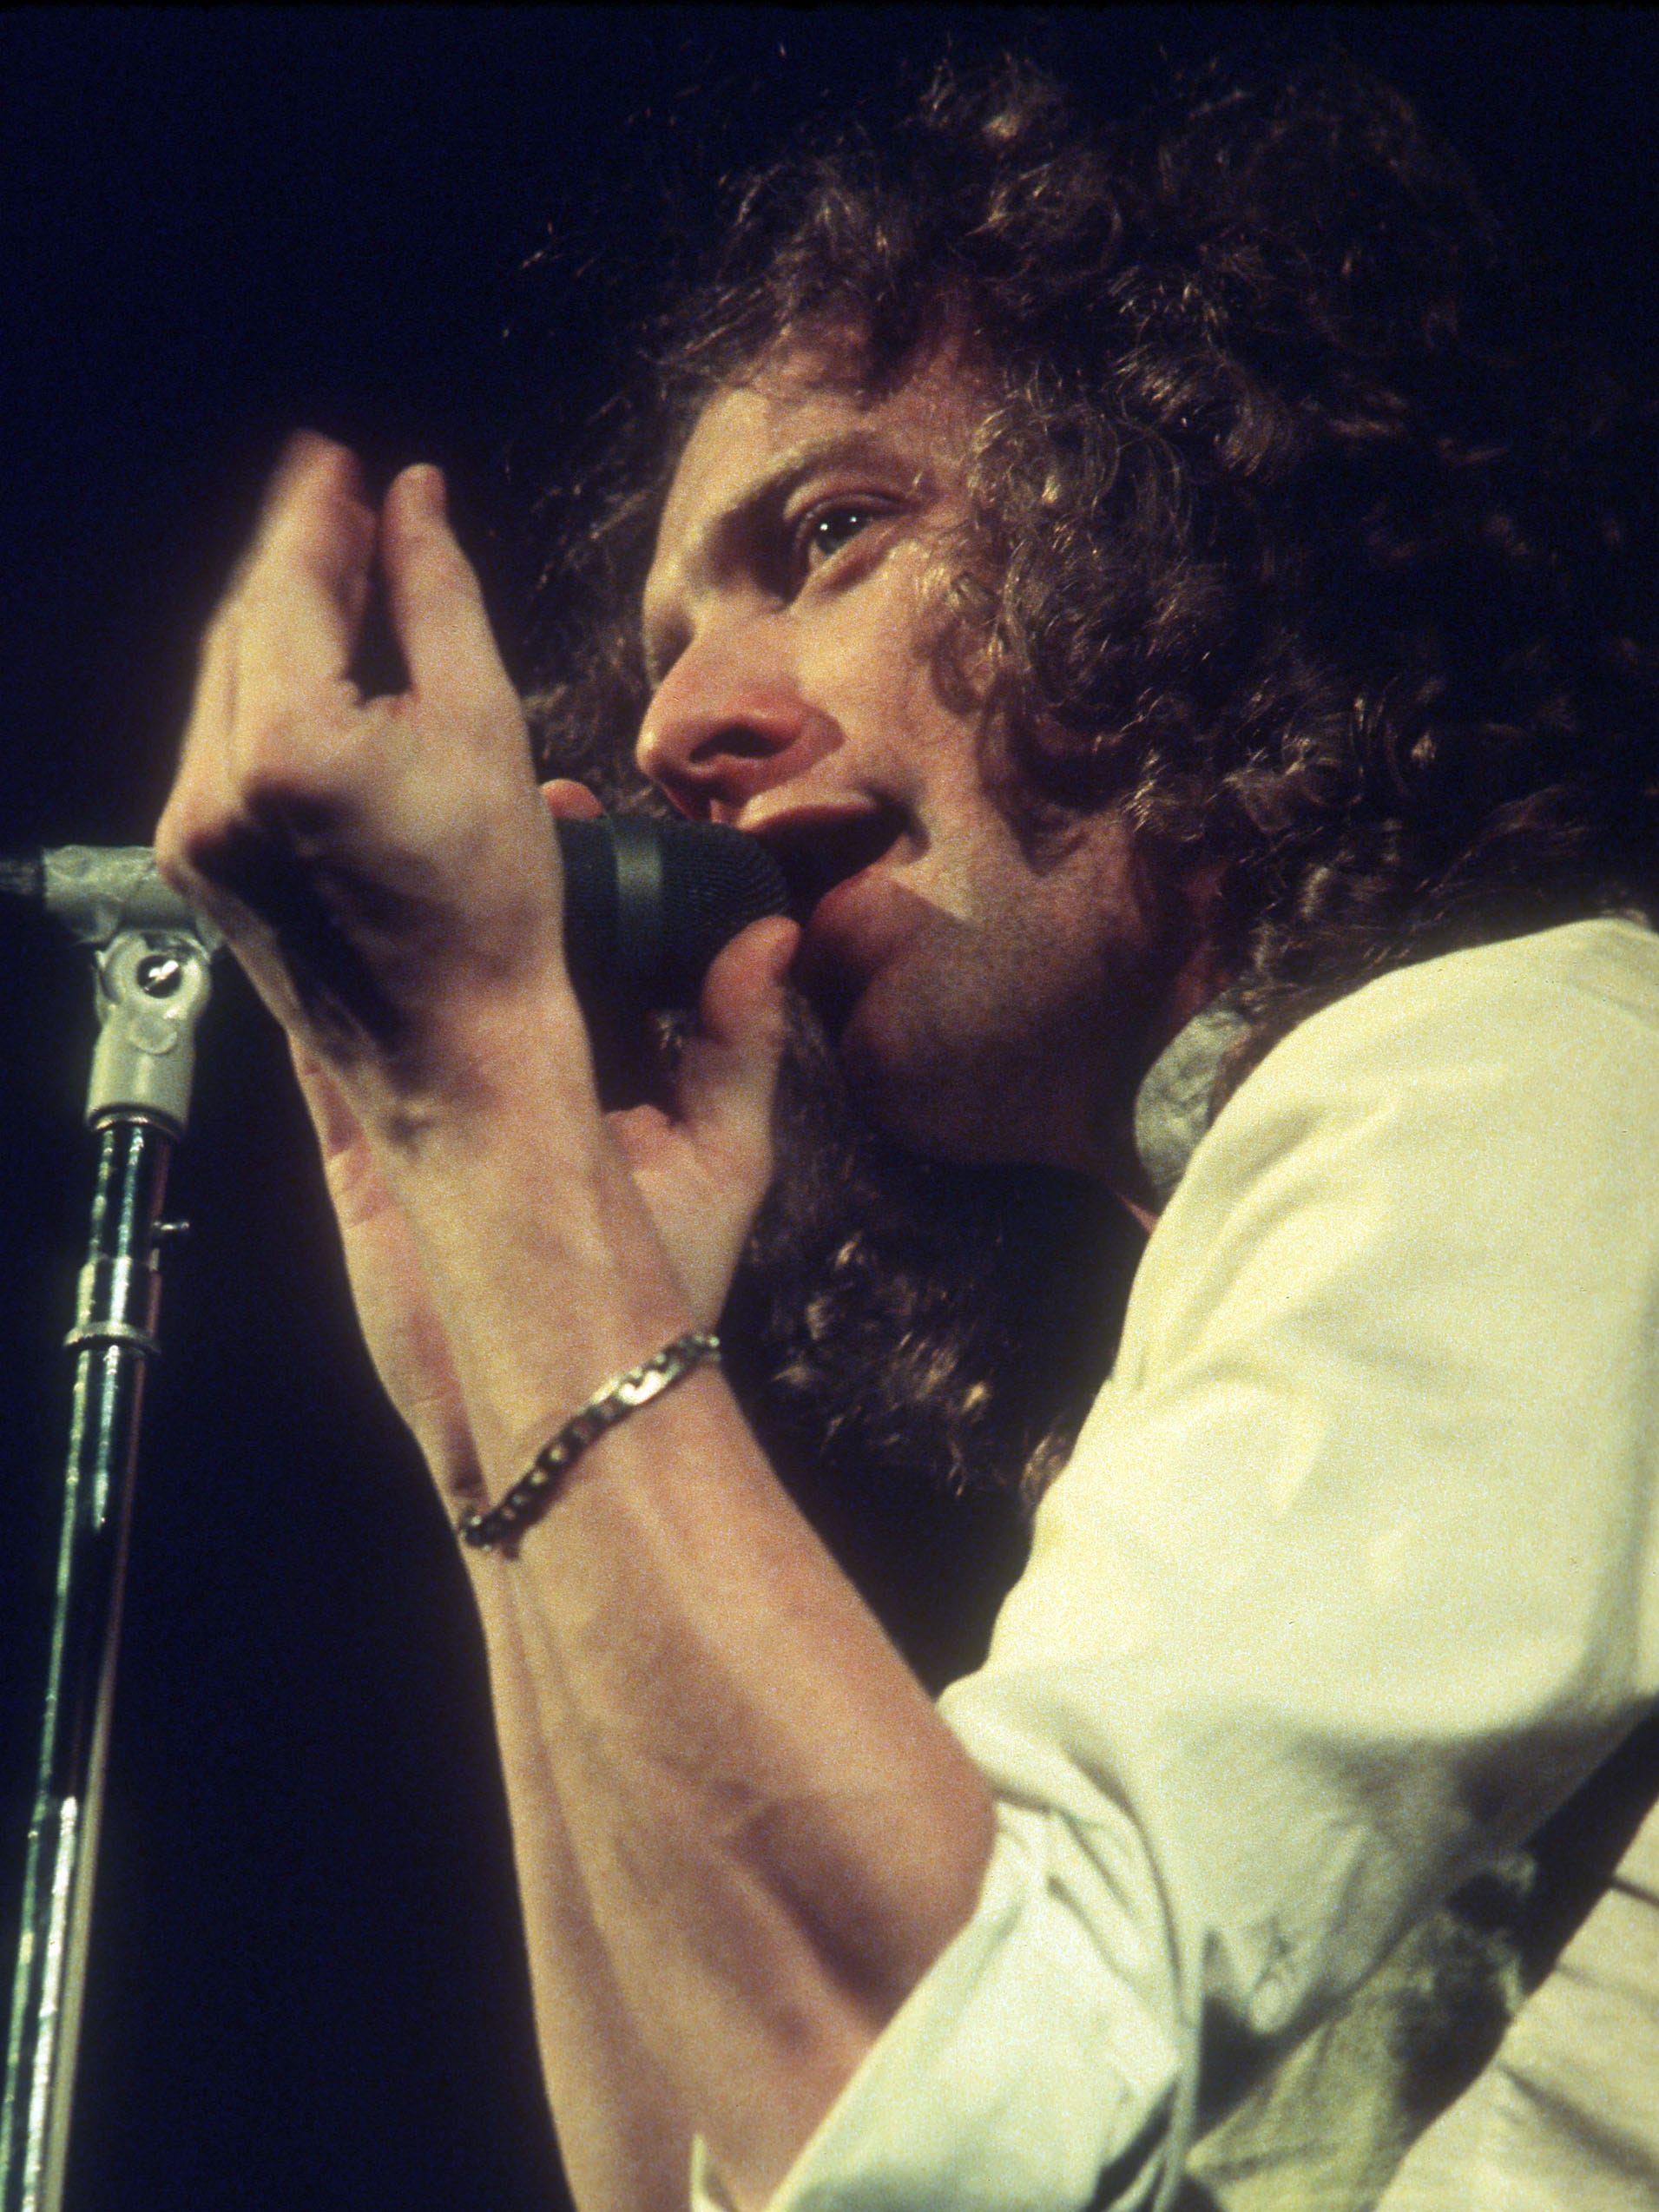 Lou Gramm has done everything he wanted to do